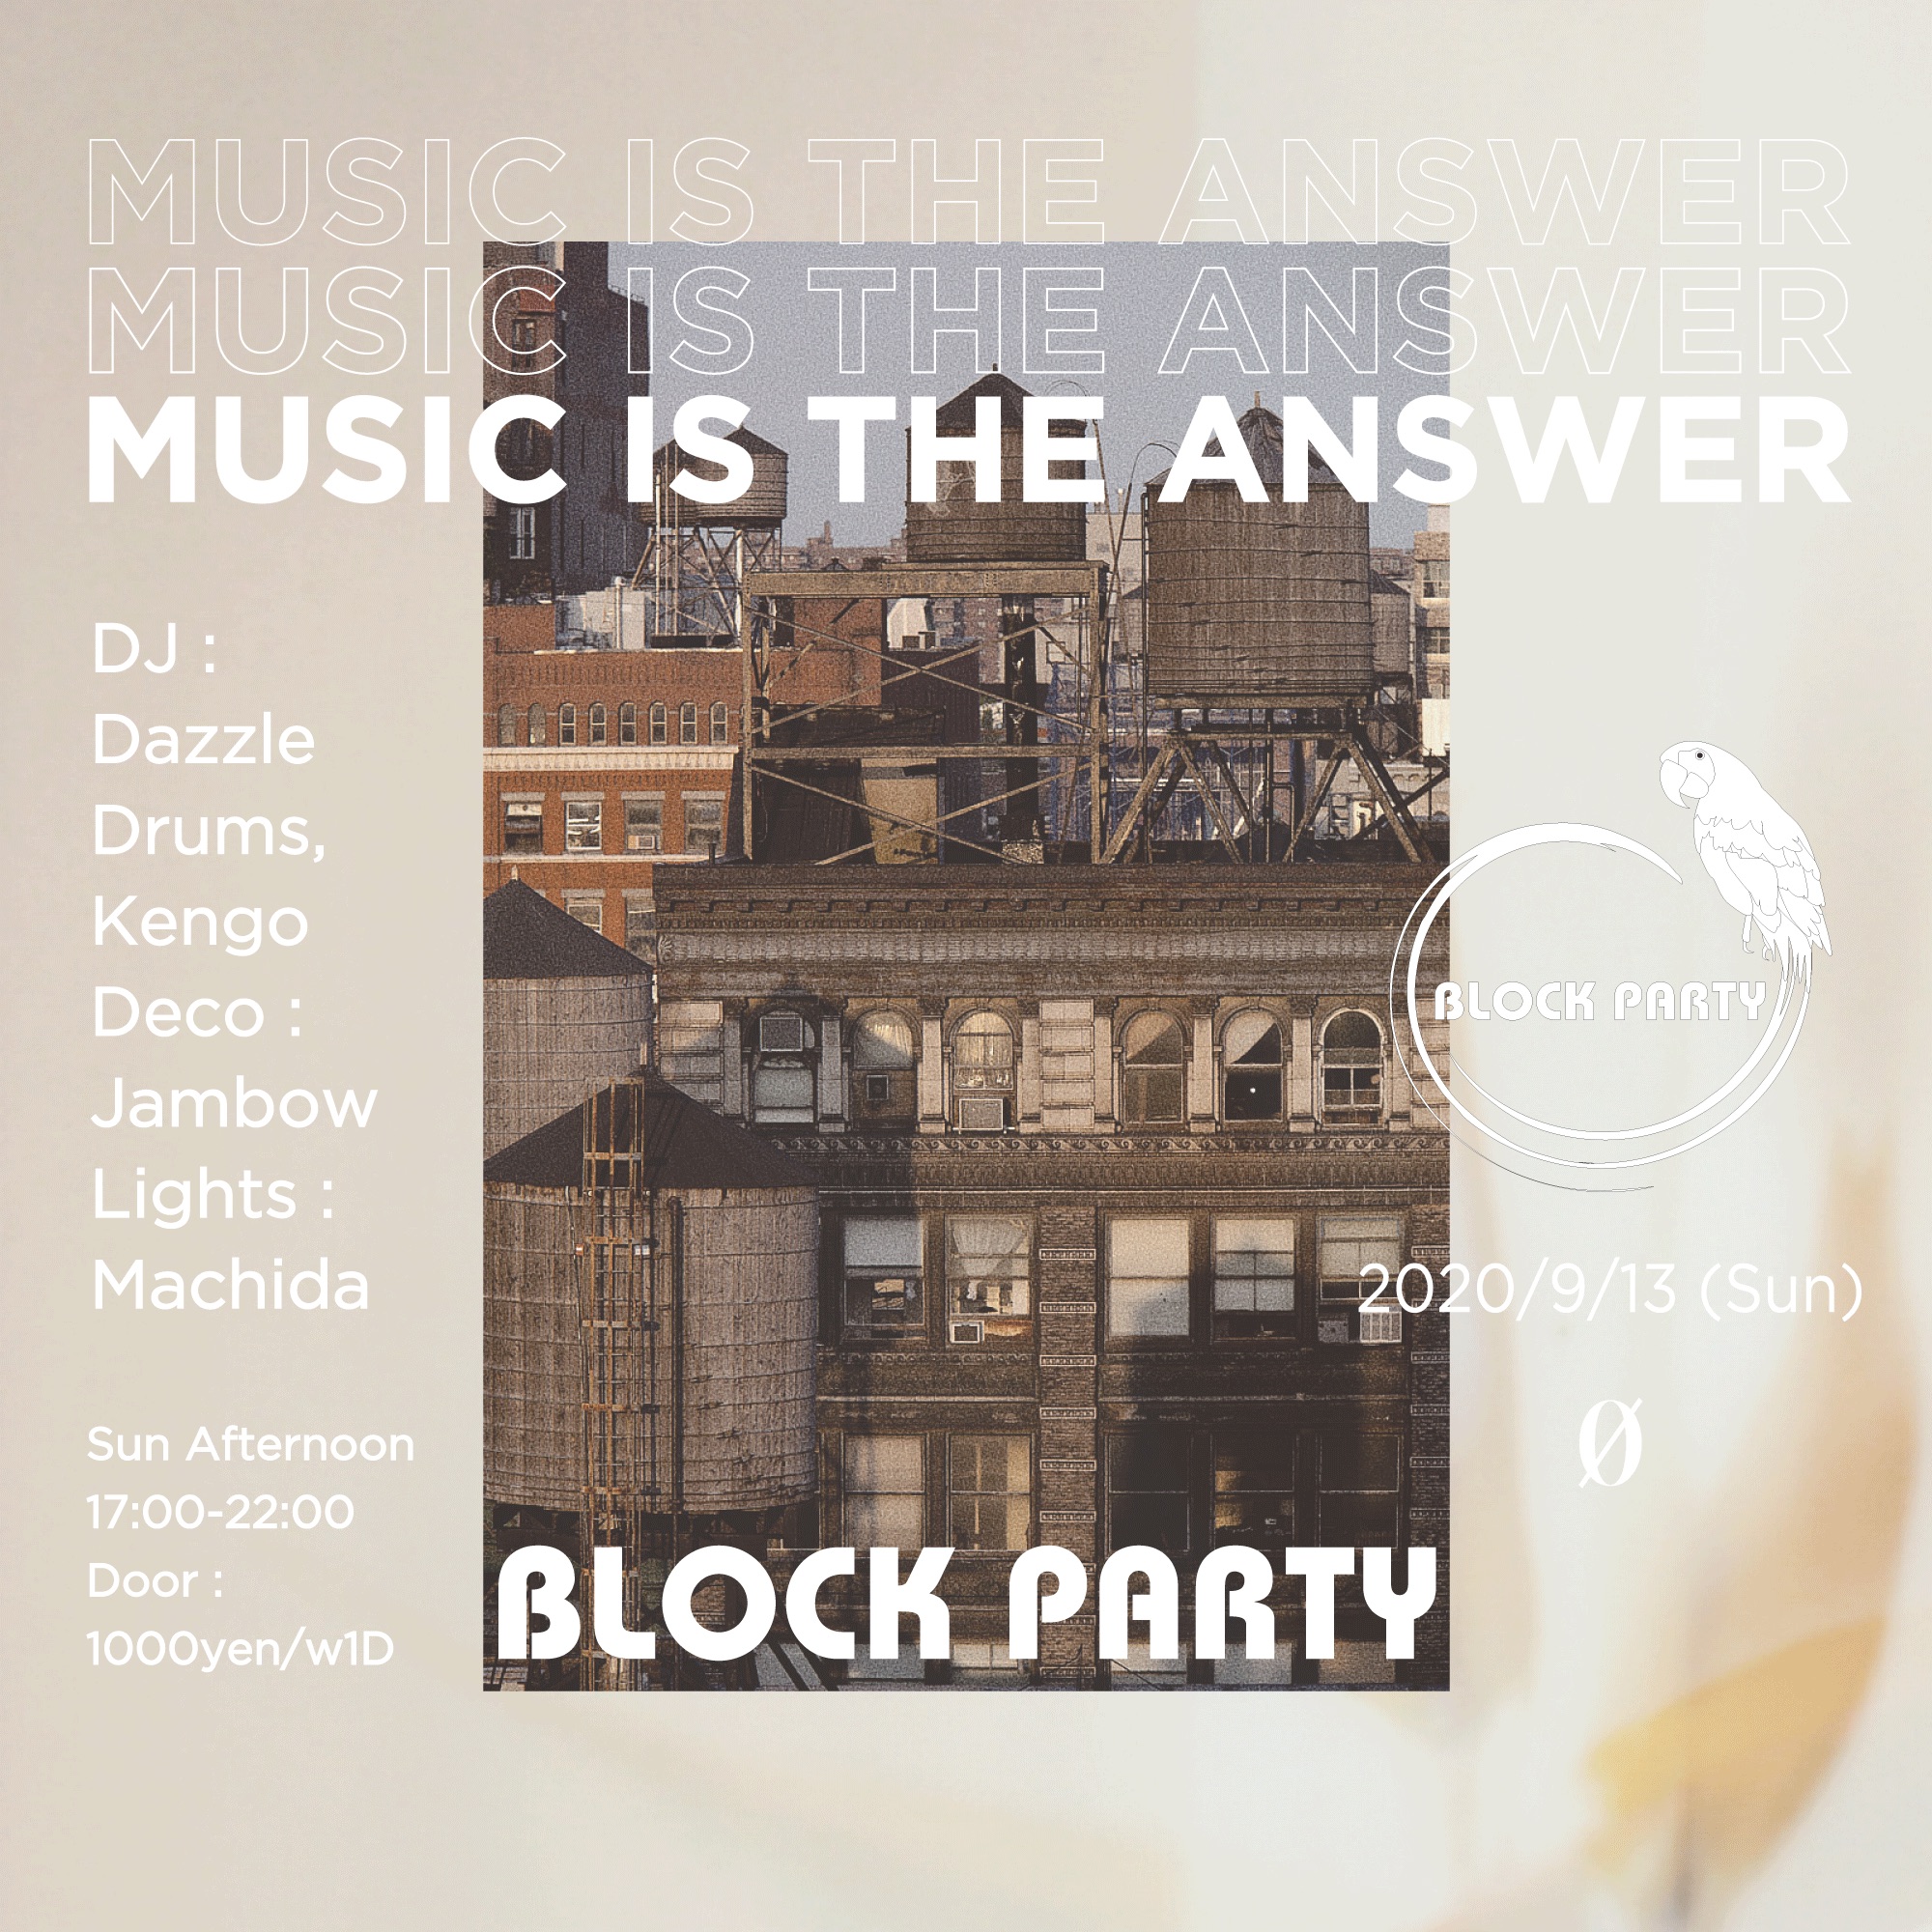 Block Party “Music Is The Answer”